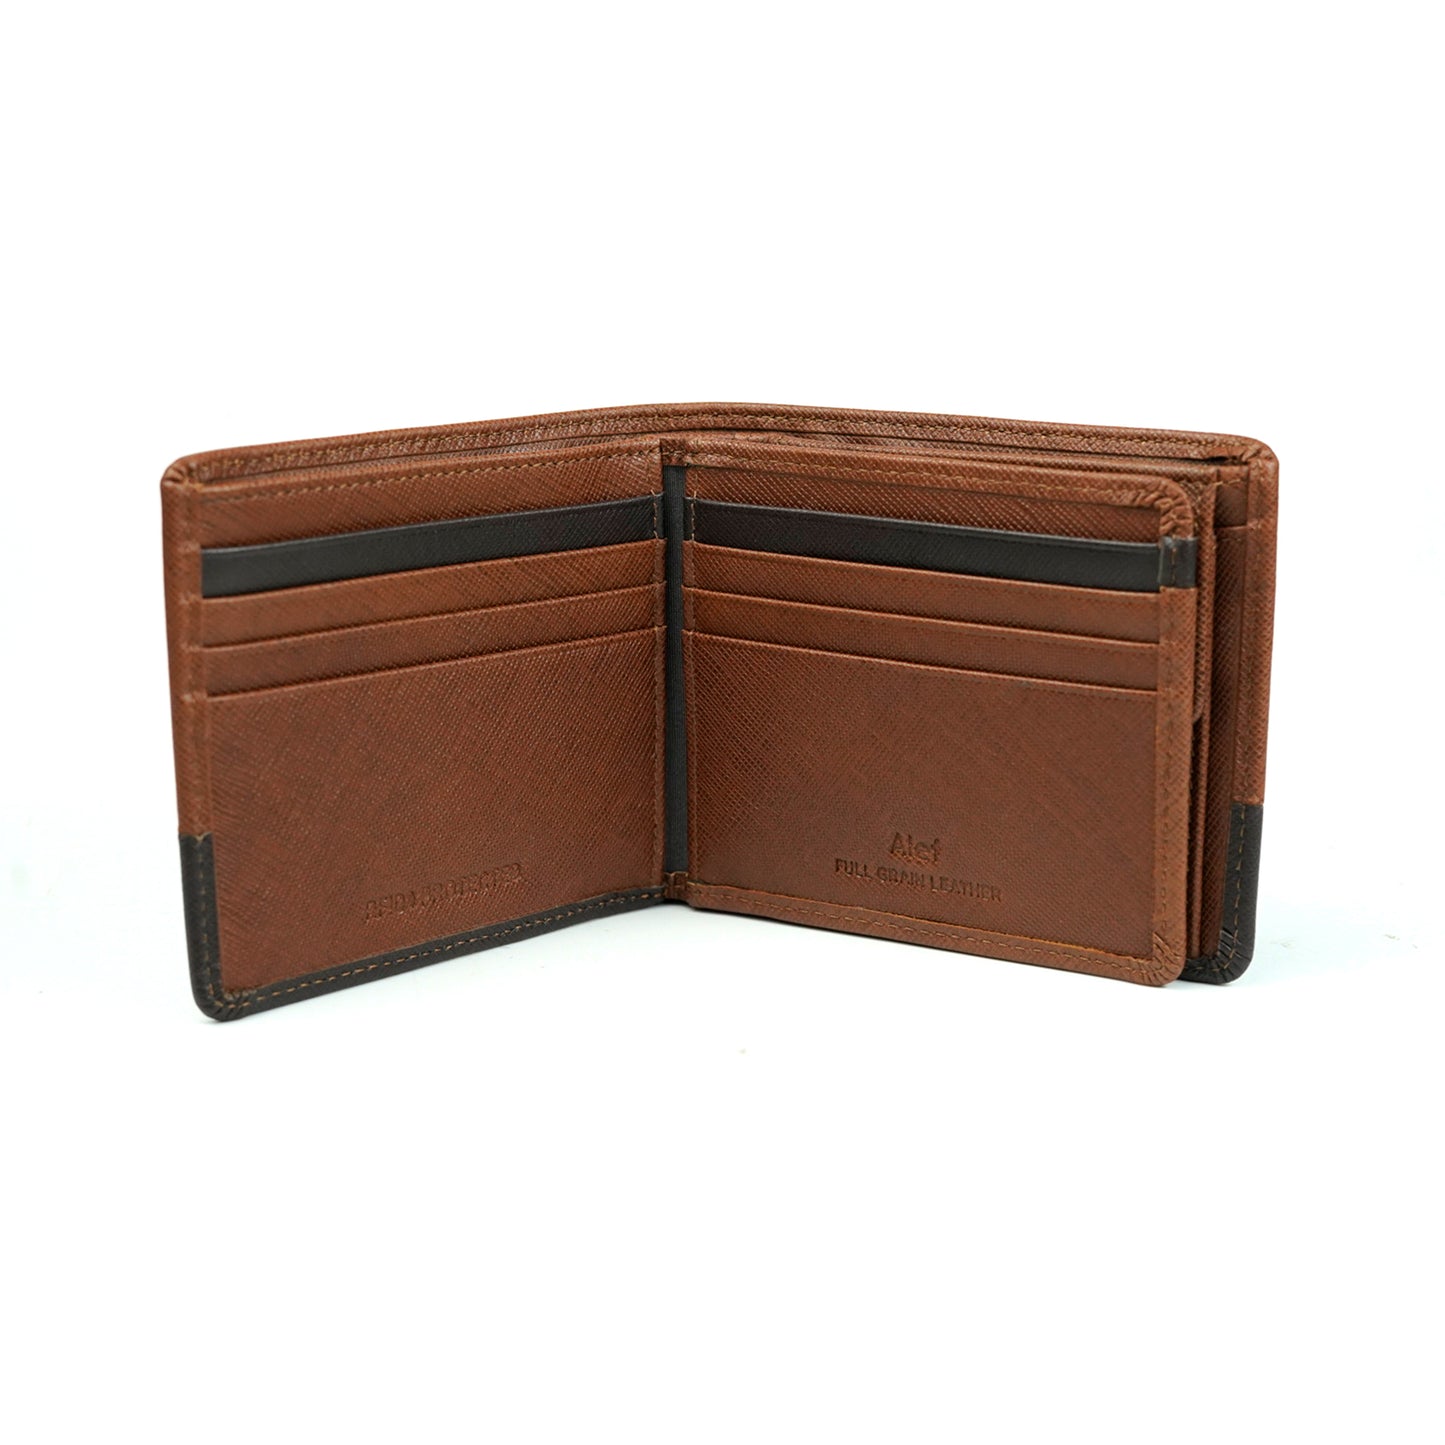 Alef Tokyo  Men's Bifold Leather Wallet with Centre Flap and Coin Pocket (Brown/Cafe)